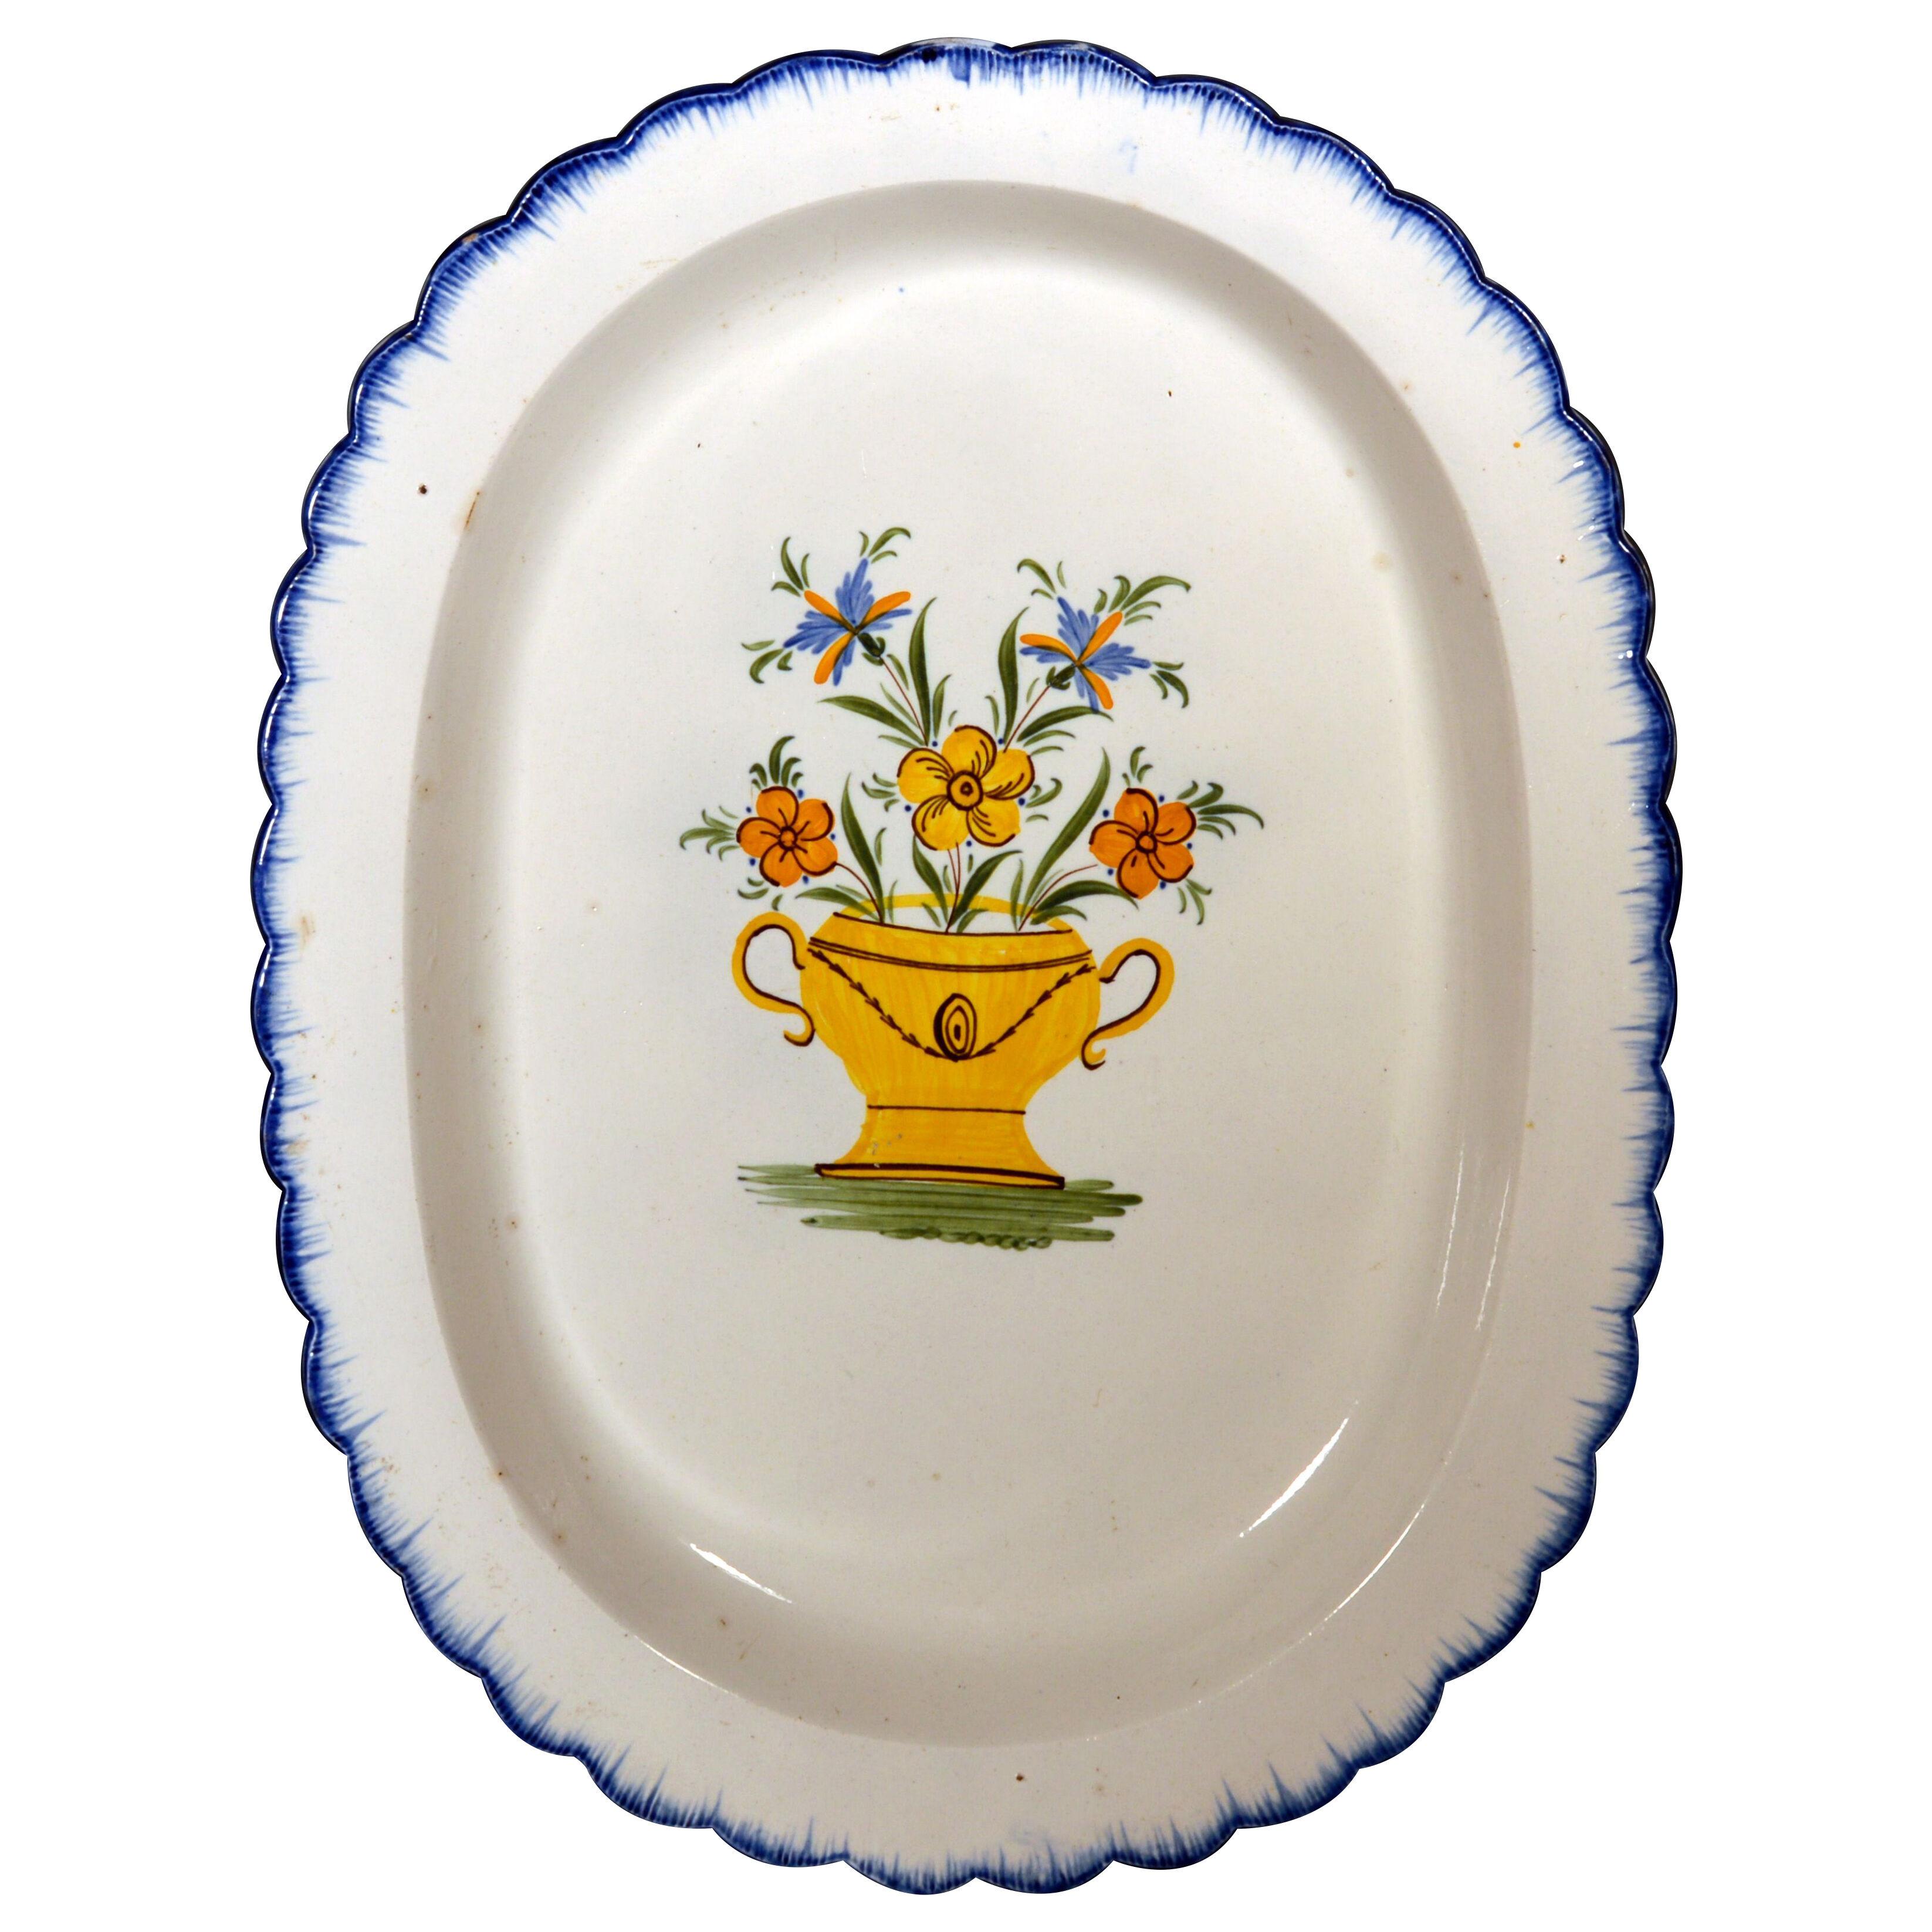 Shell-edge Prattware Oval Dish painted with An Urn of Flowers